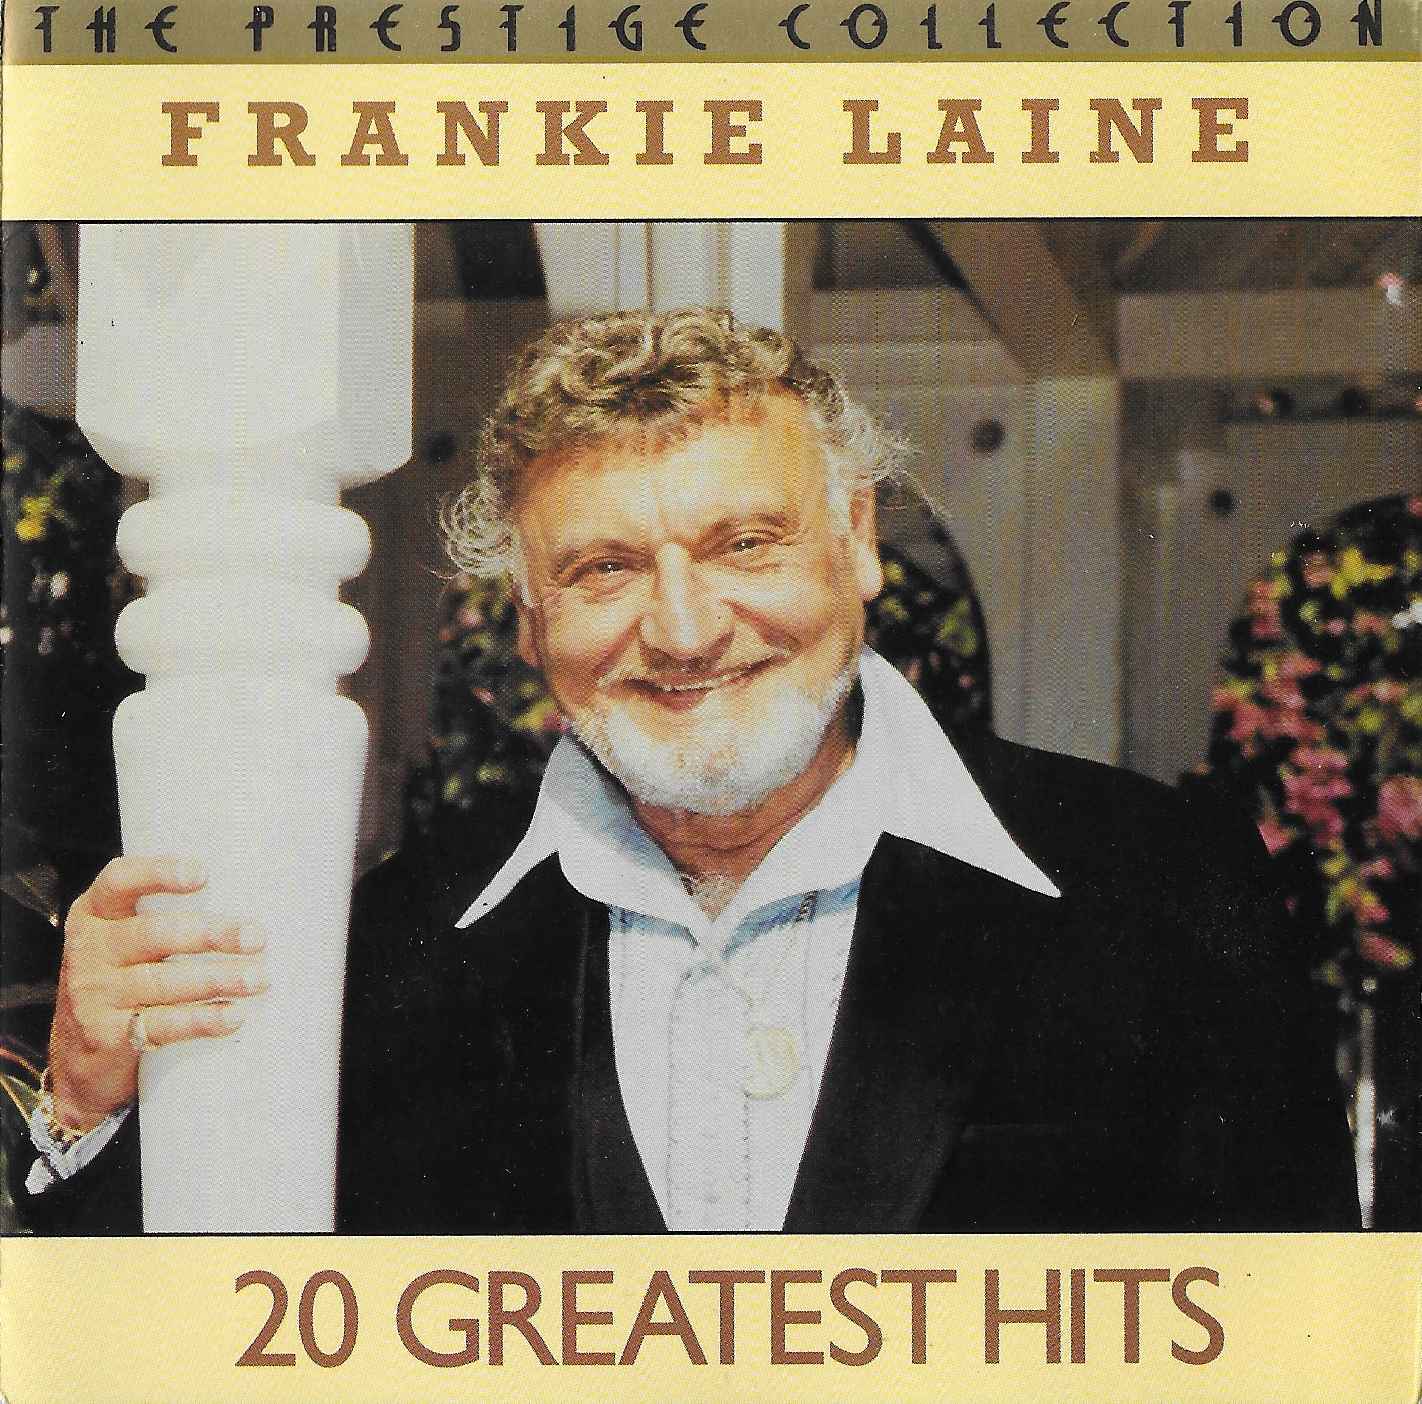 Picture of CDPC 5004 20 greatest hits by artist Frankie Laine from the BBC cds - Records and Tapes library